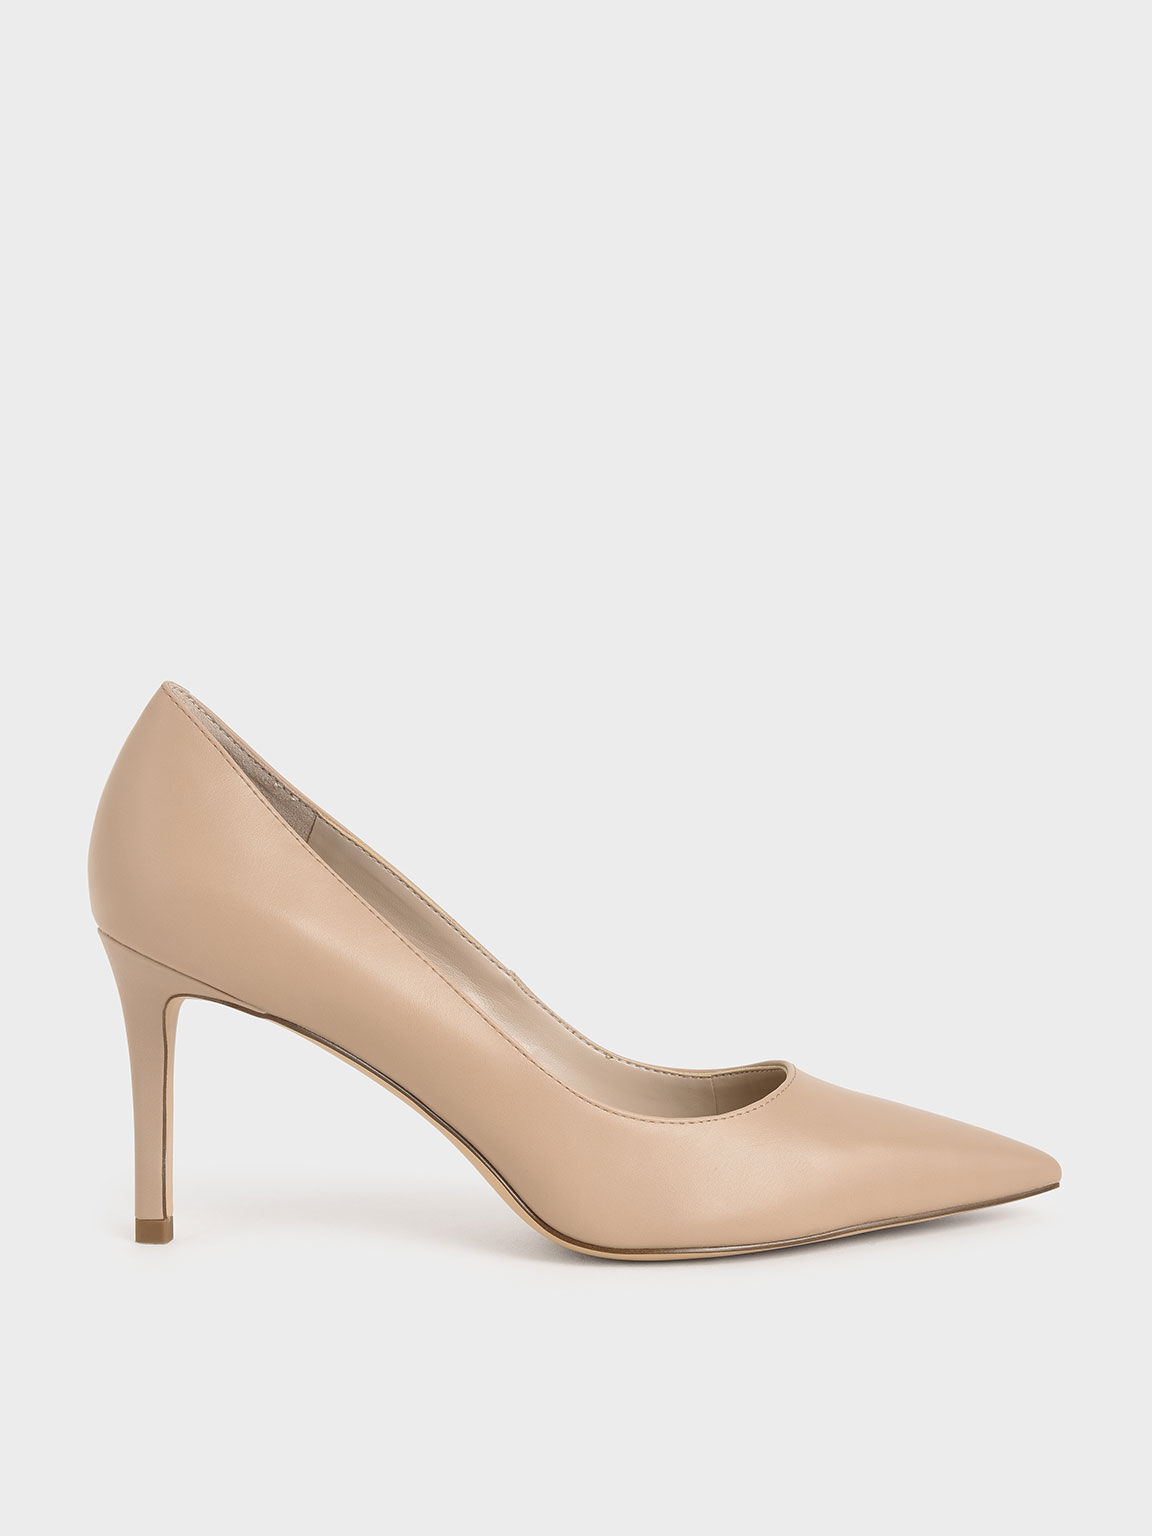 Classic Stiletto Pumps - CHARLES & KEITH